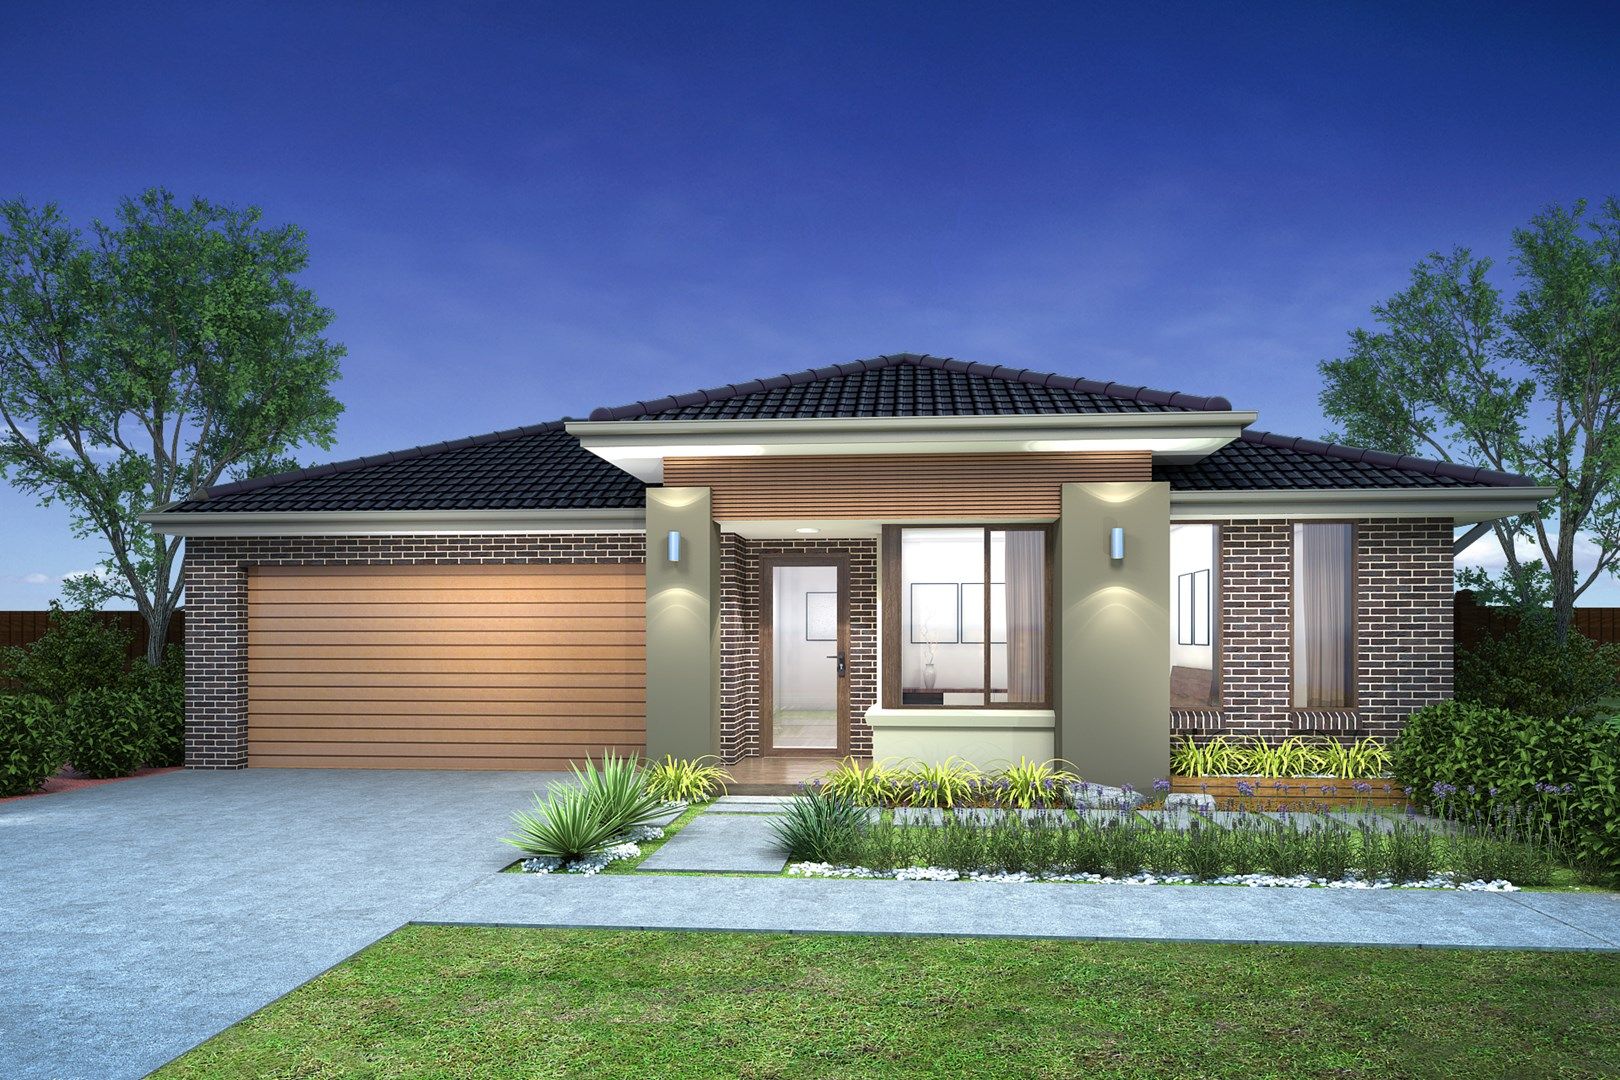 4 bedrooms New House & Land in Lot 711 Cole Street Attwell DEANSIDE VIC, 3336